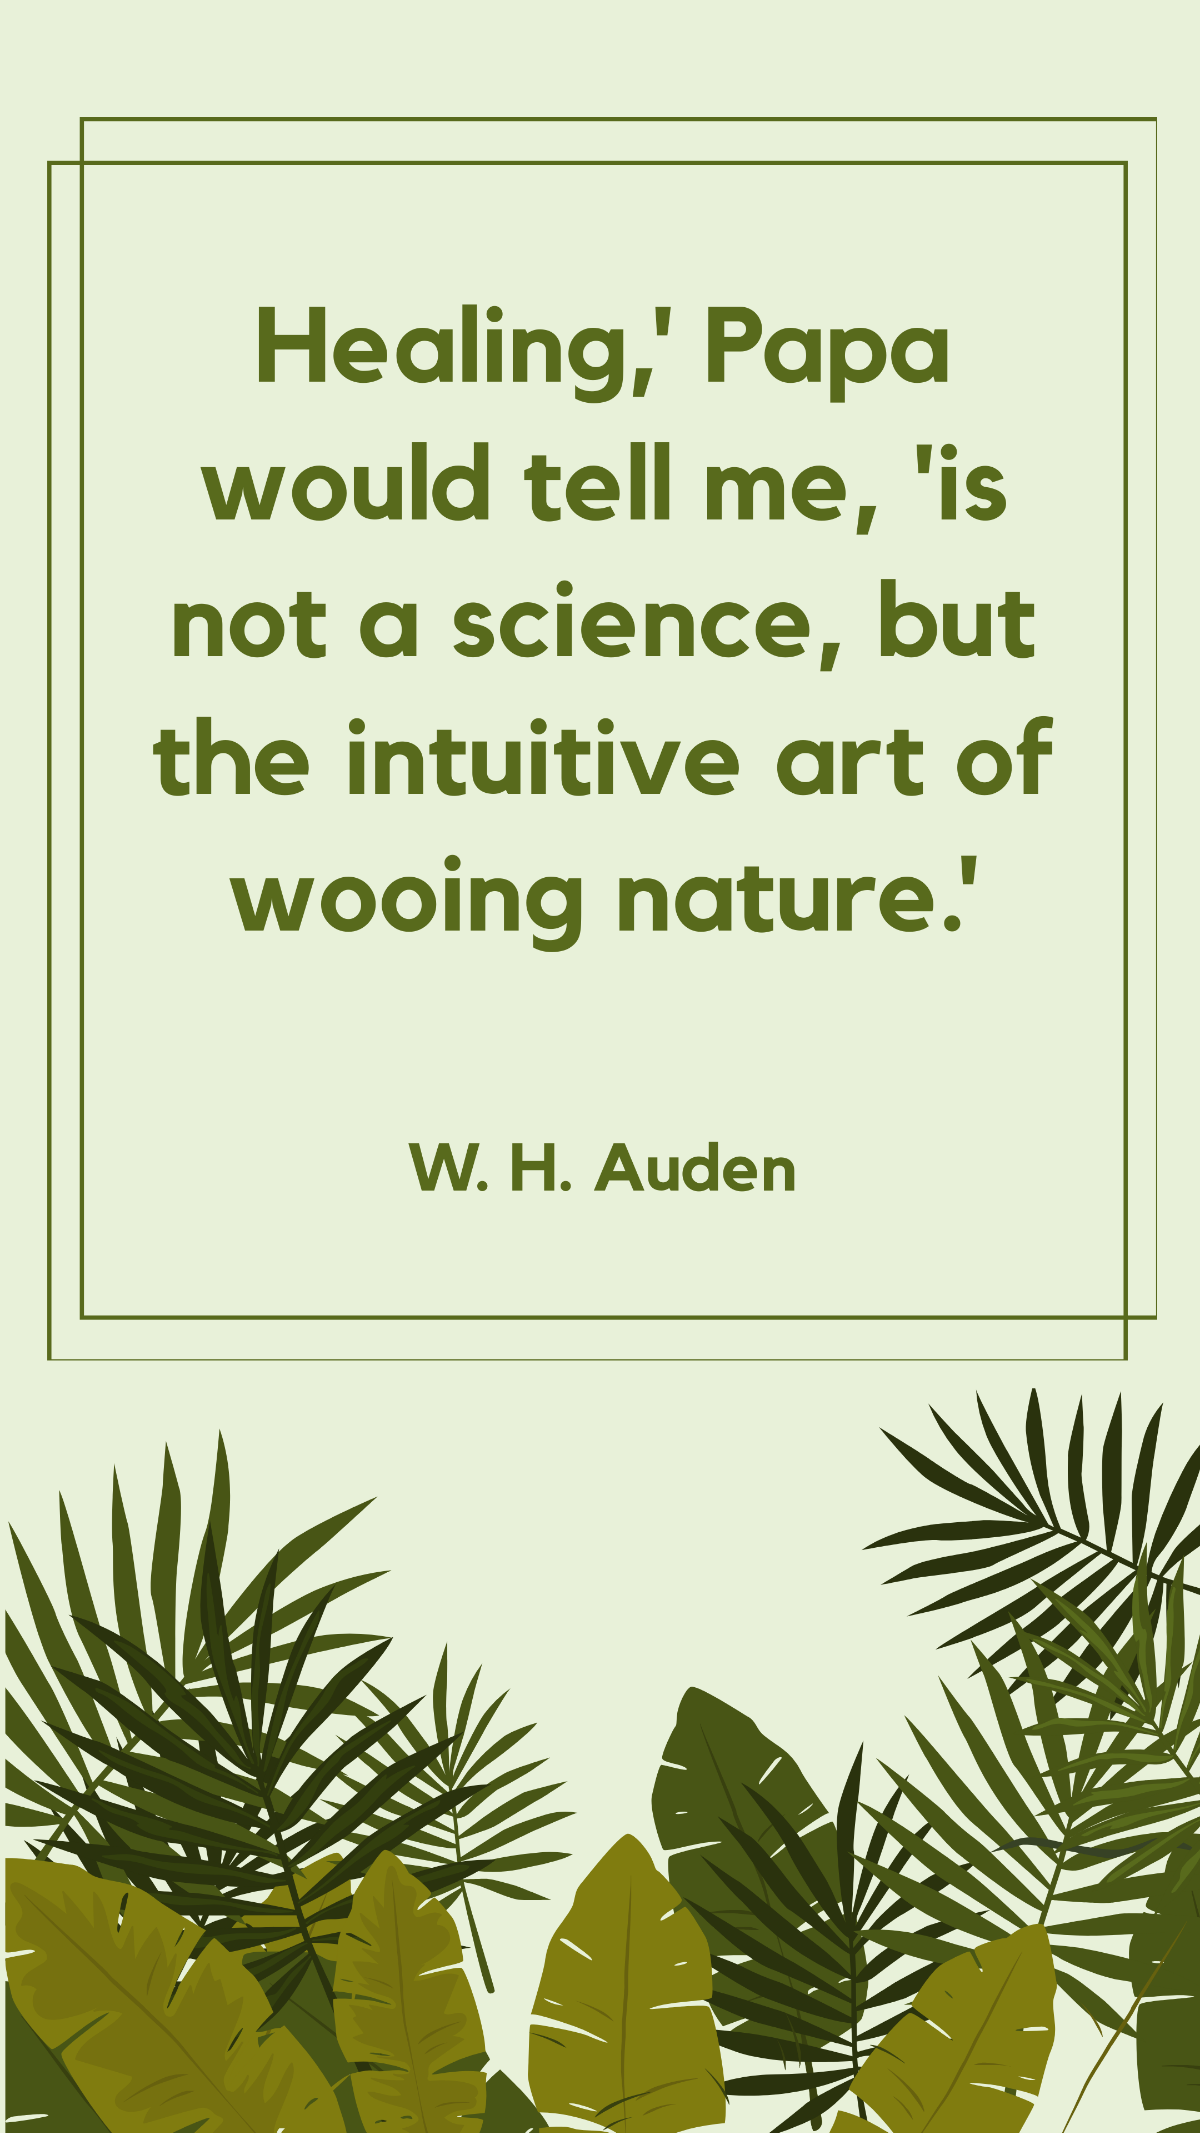 W. H. Auden - Healing,' Papa would tell me, 'is not a science, but the intuitive art of wooing nature.' Template